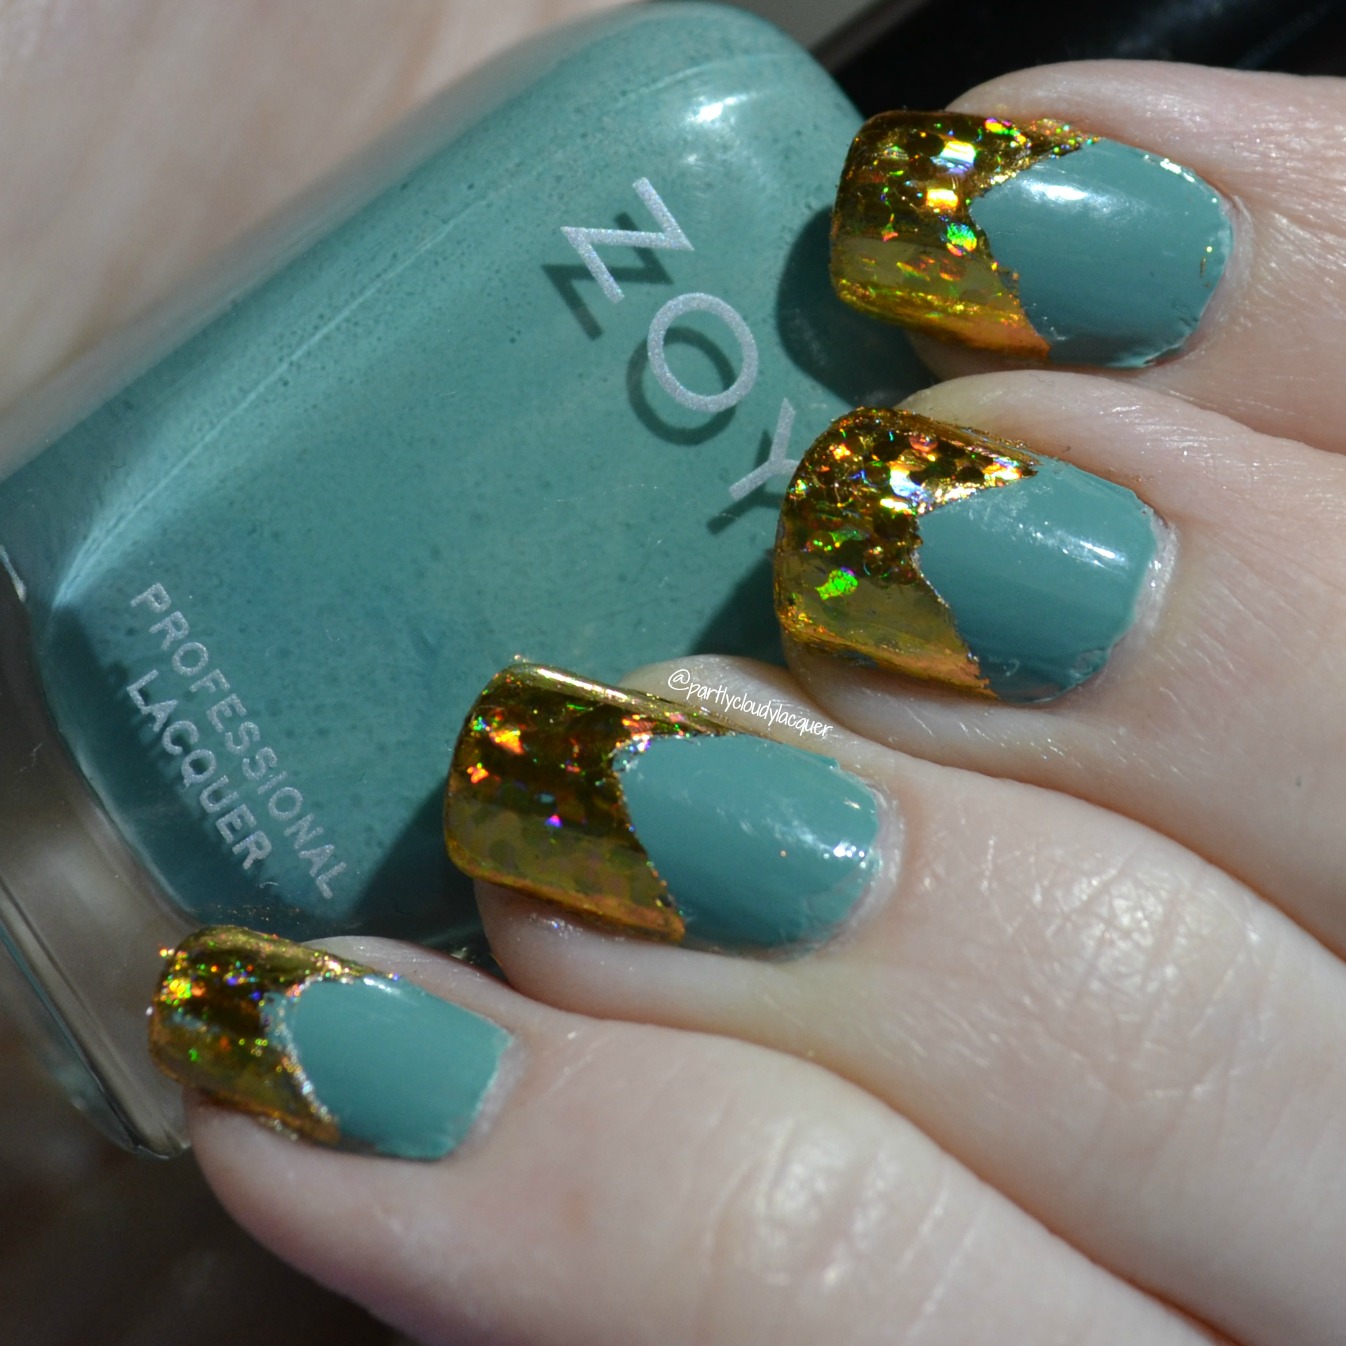 Partly Cloudy With a Chance of Lacquer: French Tip Nails using Nail Foil